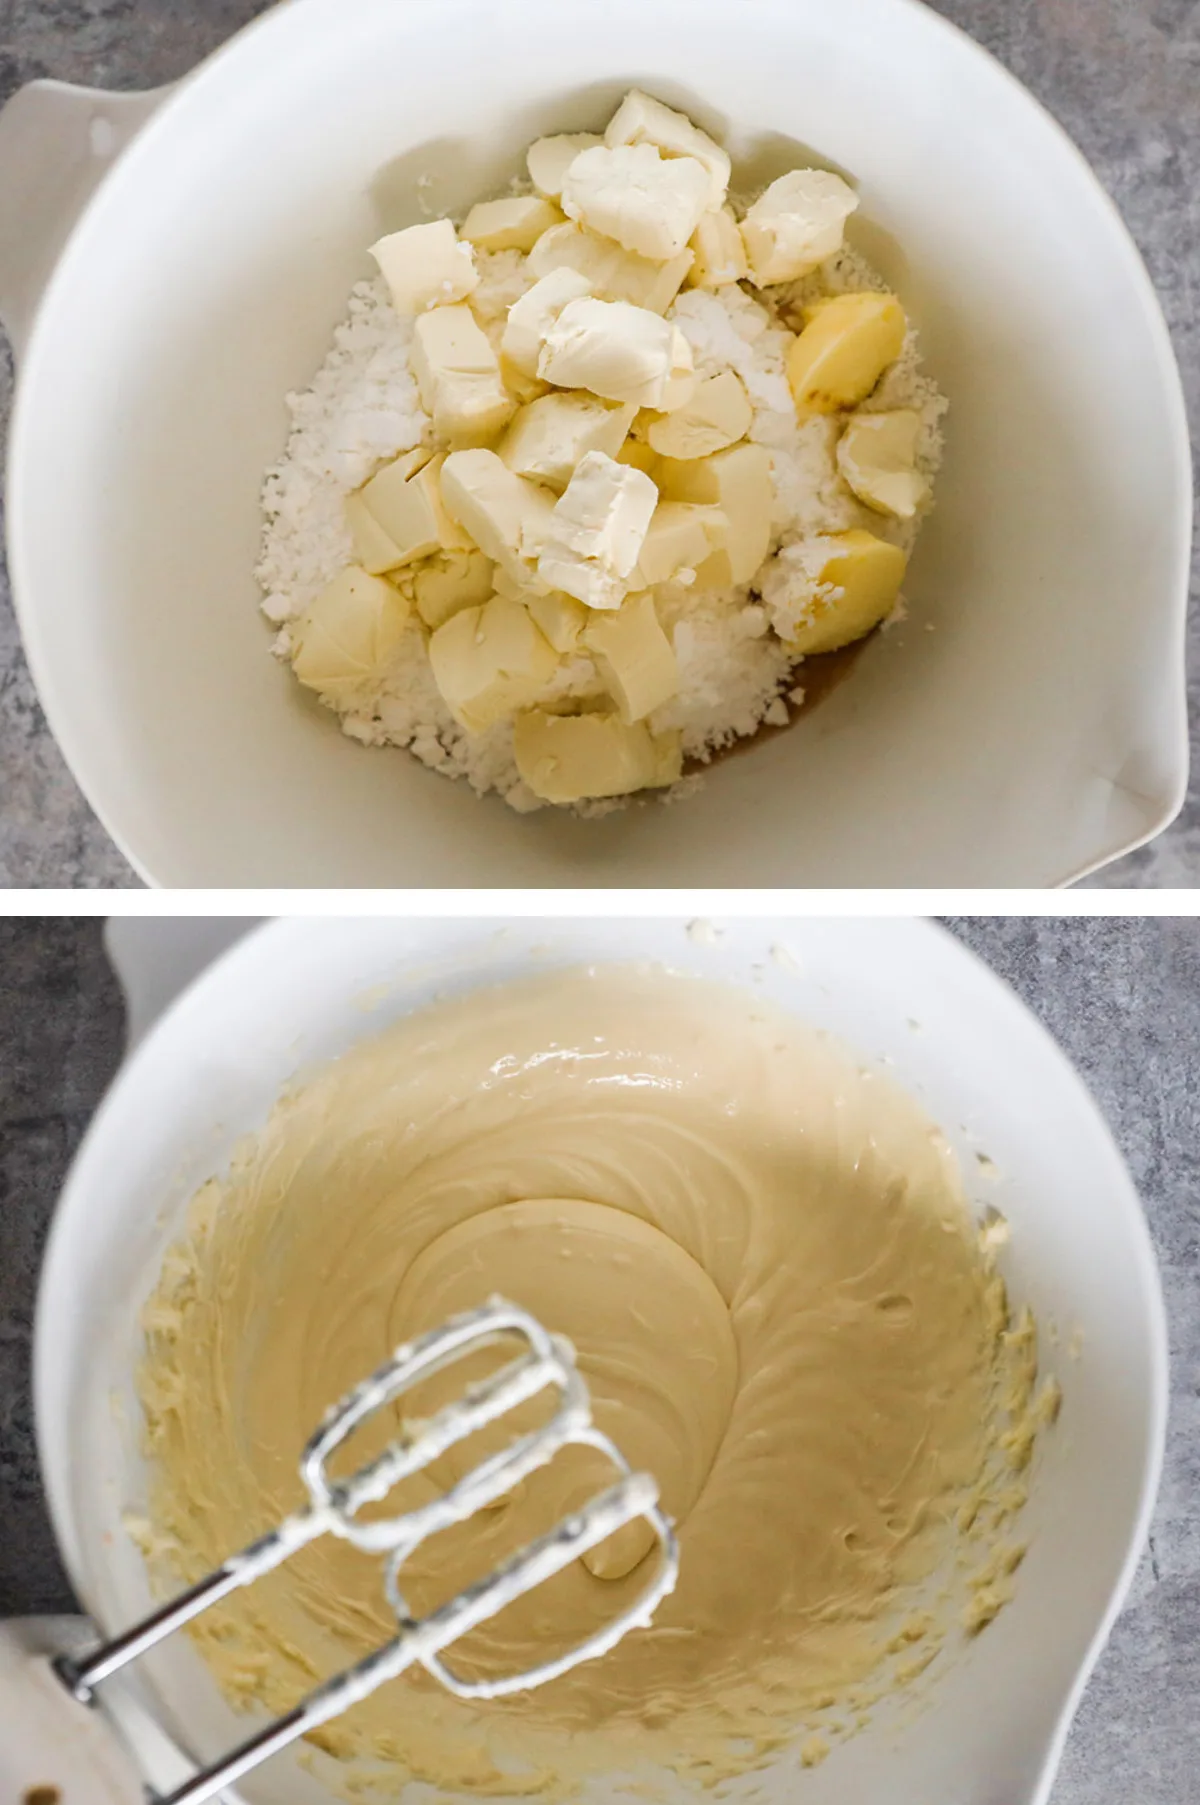 Two overhead images in one: 1. Ingredients for cream cheese frosting in a white bowl. 2. Ingredients are mixed with a hand mixer. 